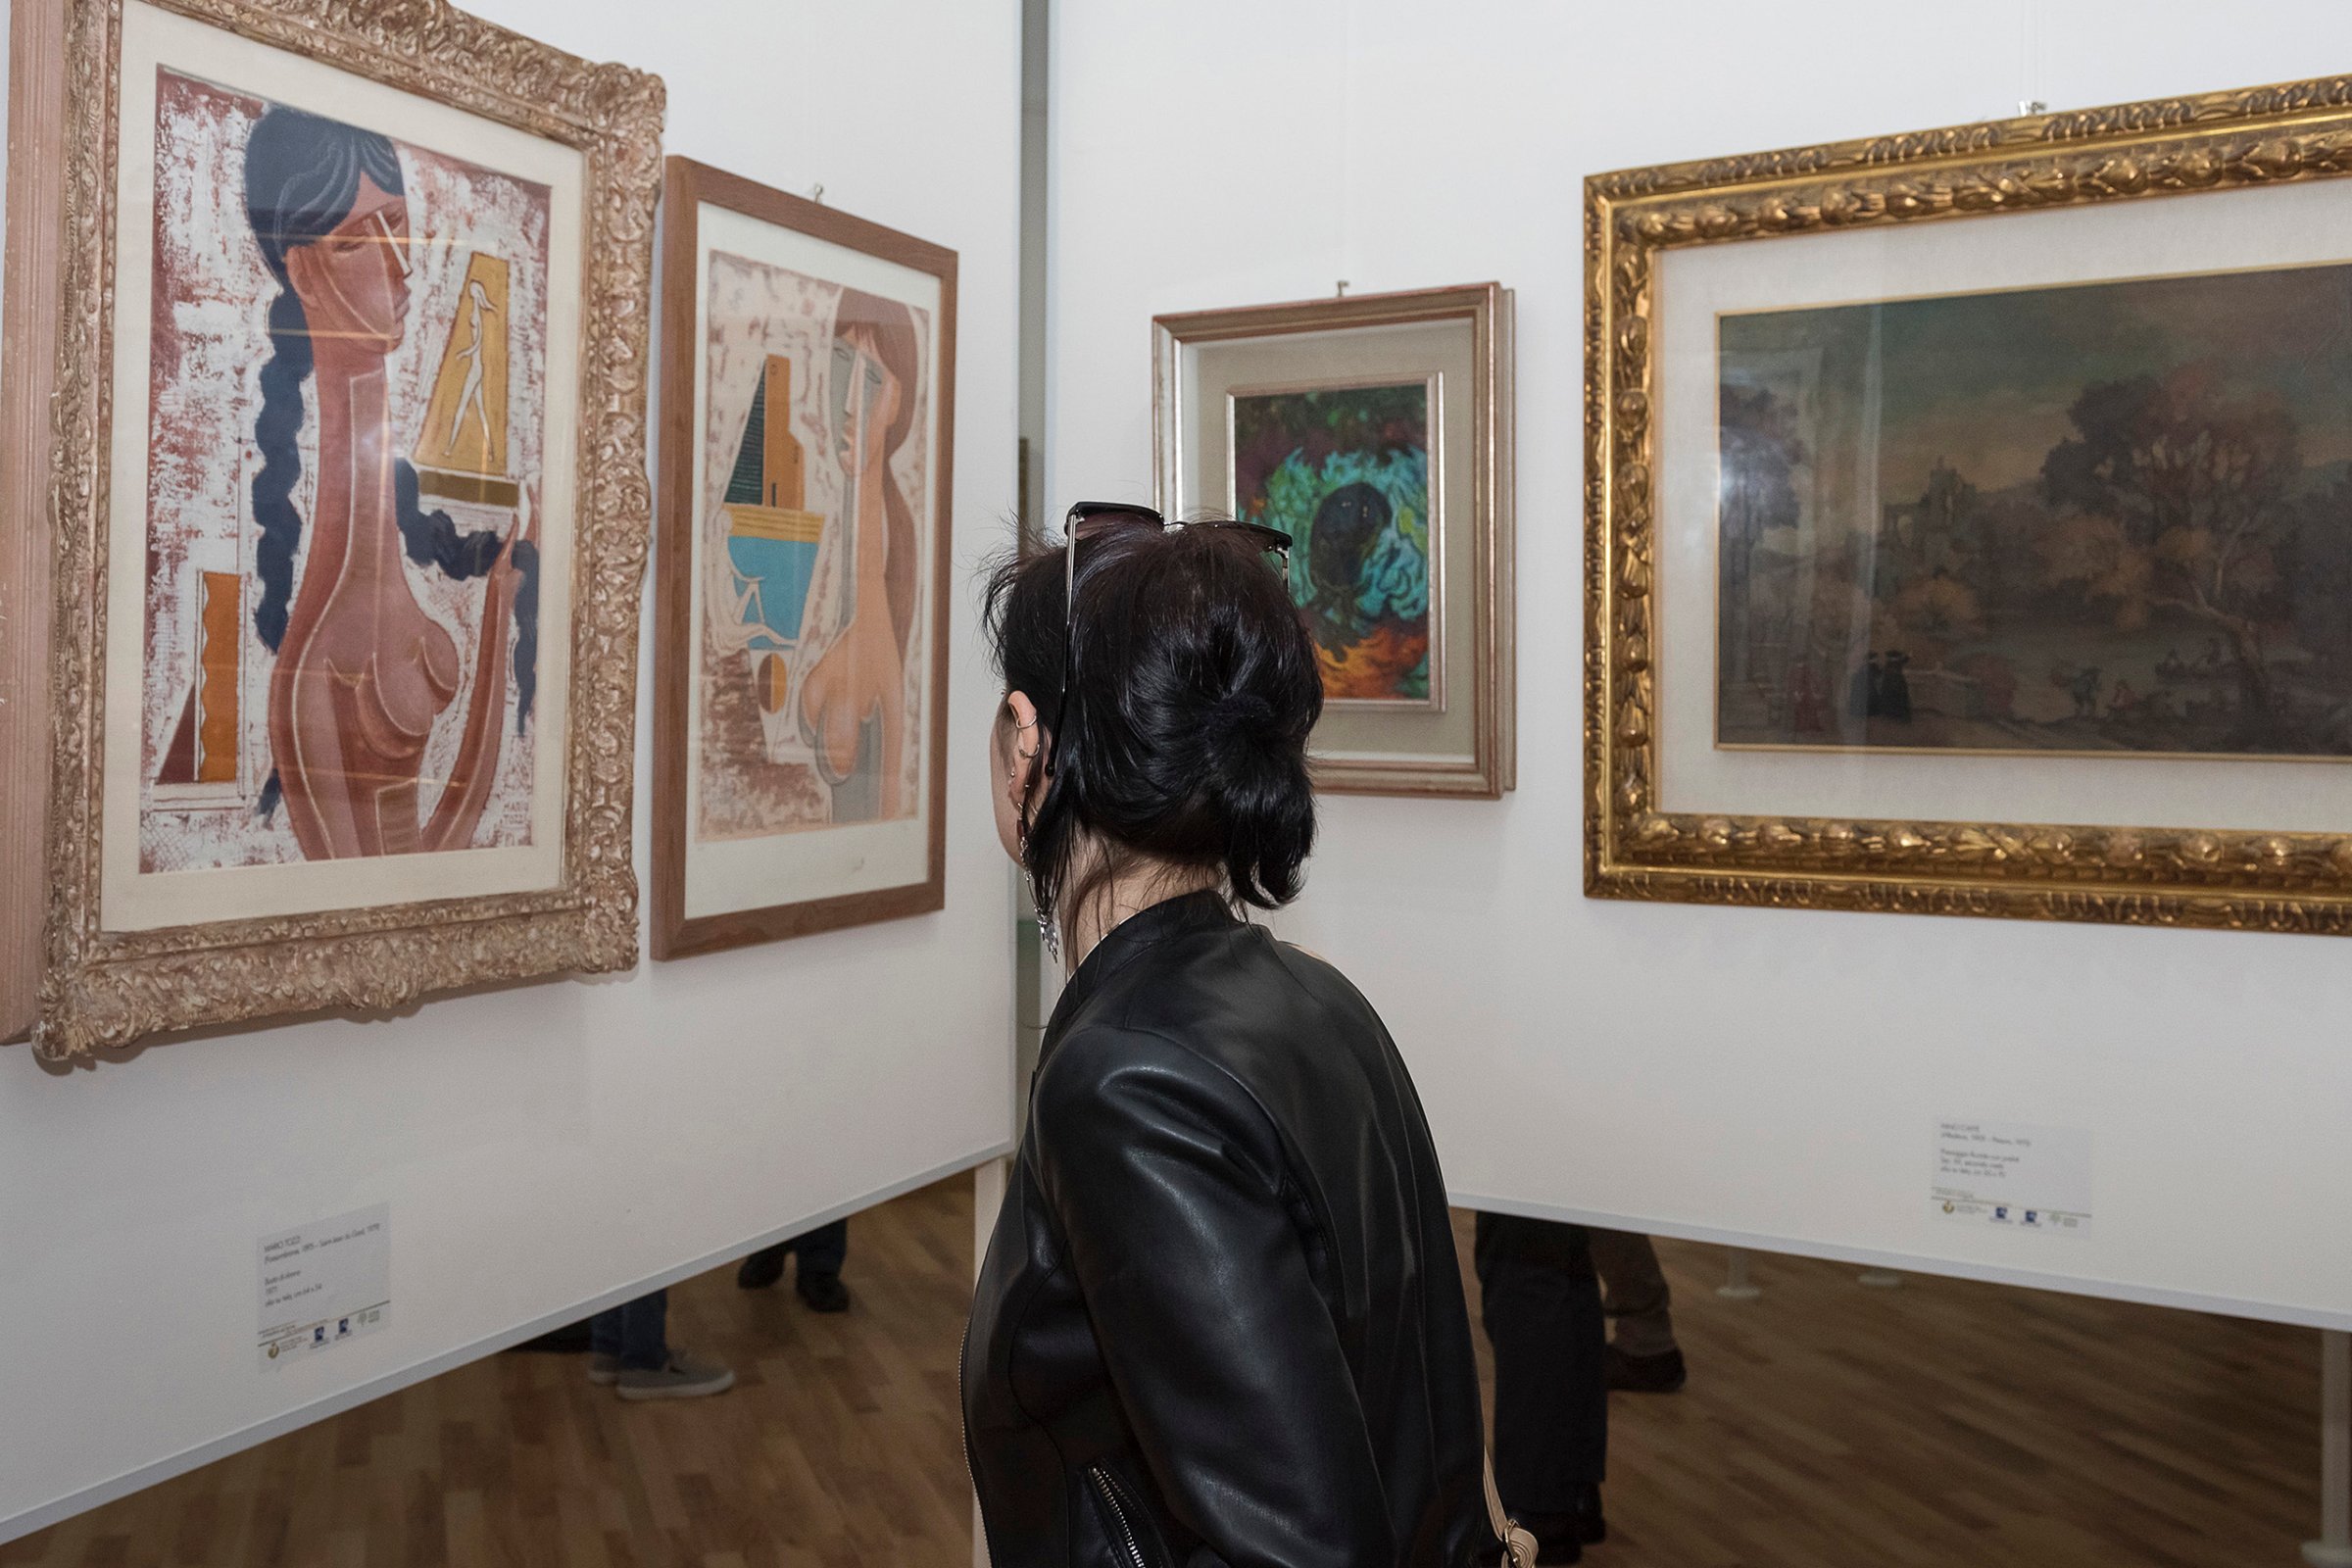 A visitor admires paintings during the "Victory of the State" exhibition in Reggio Calabria, Italy, on May 7, 2016. The exhibition includes paintings that belonged to a boss of the 'Ndrangheta Calabrese mafia, notably two of Dali, and were confiscated by the court.